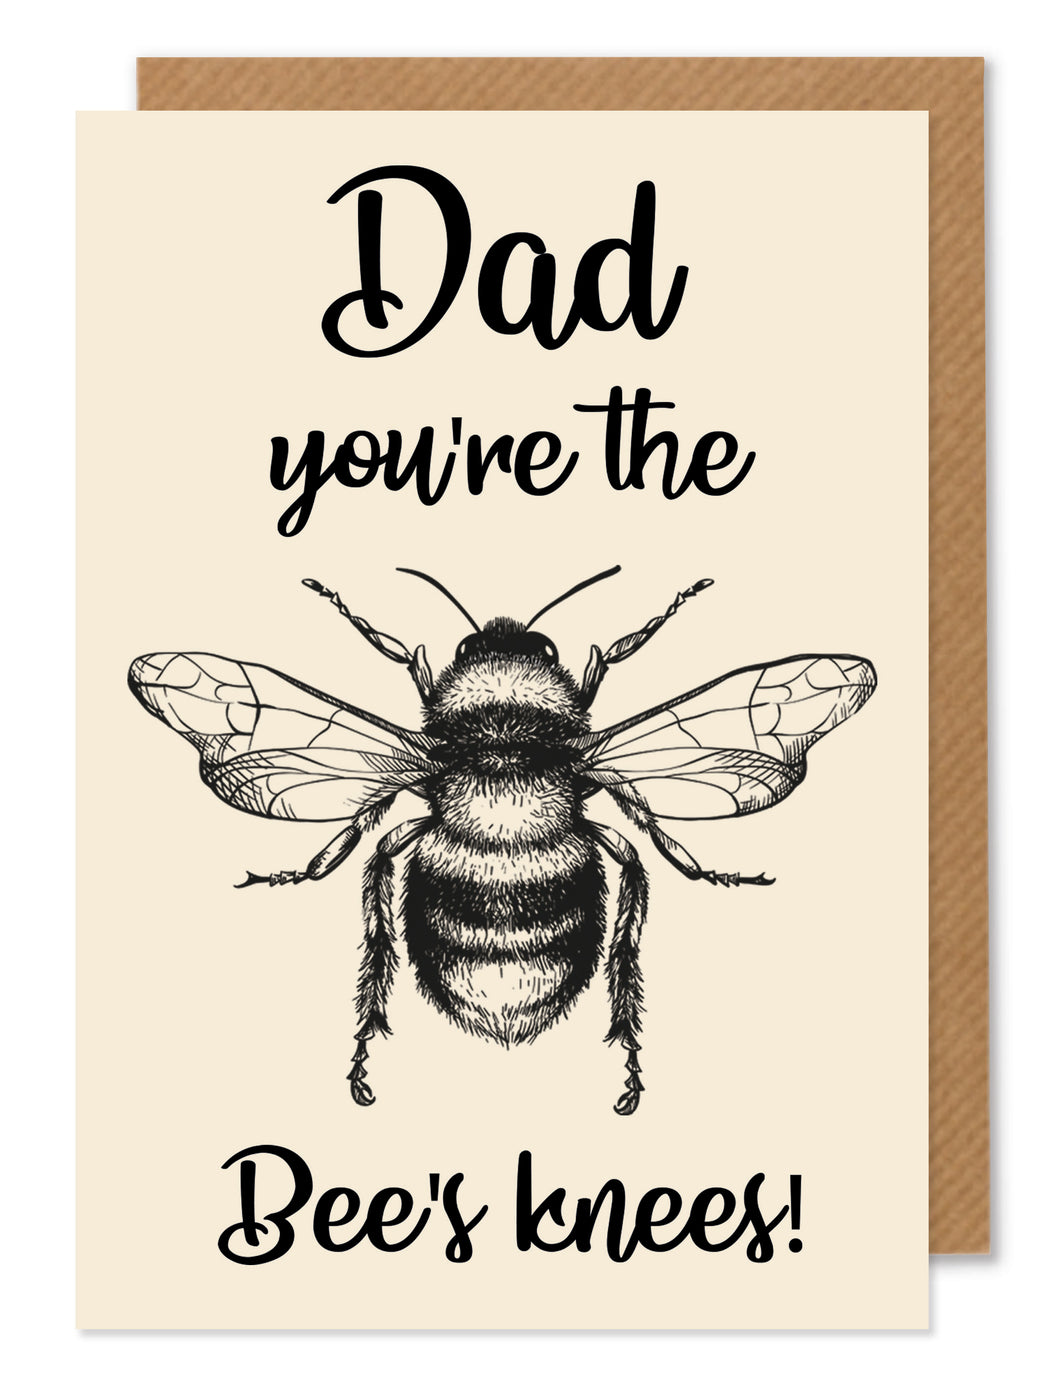 Dad, you're the bees knees! - Greetings card - Hello Sweetie